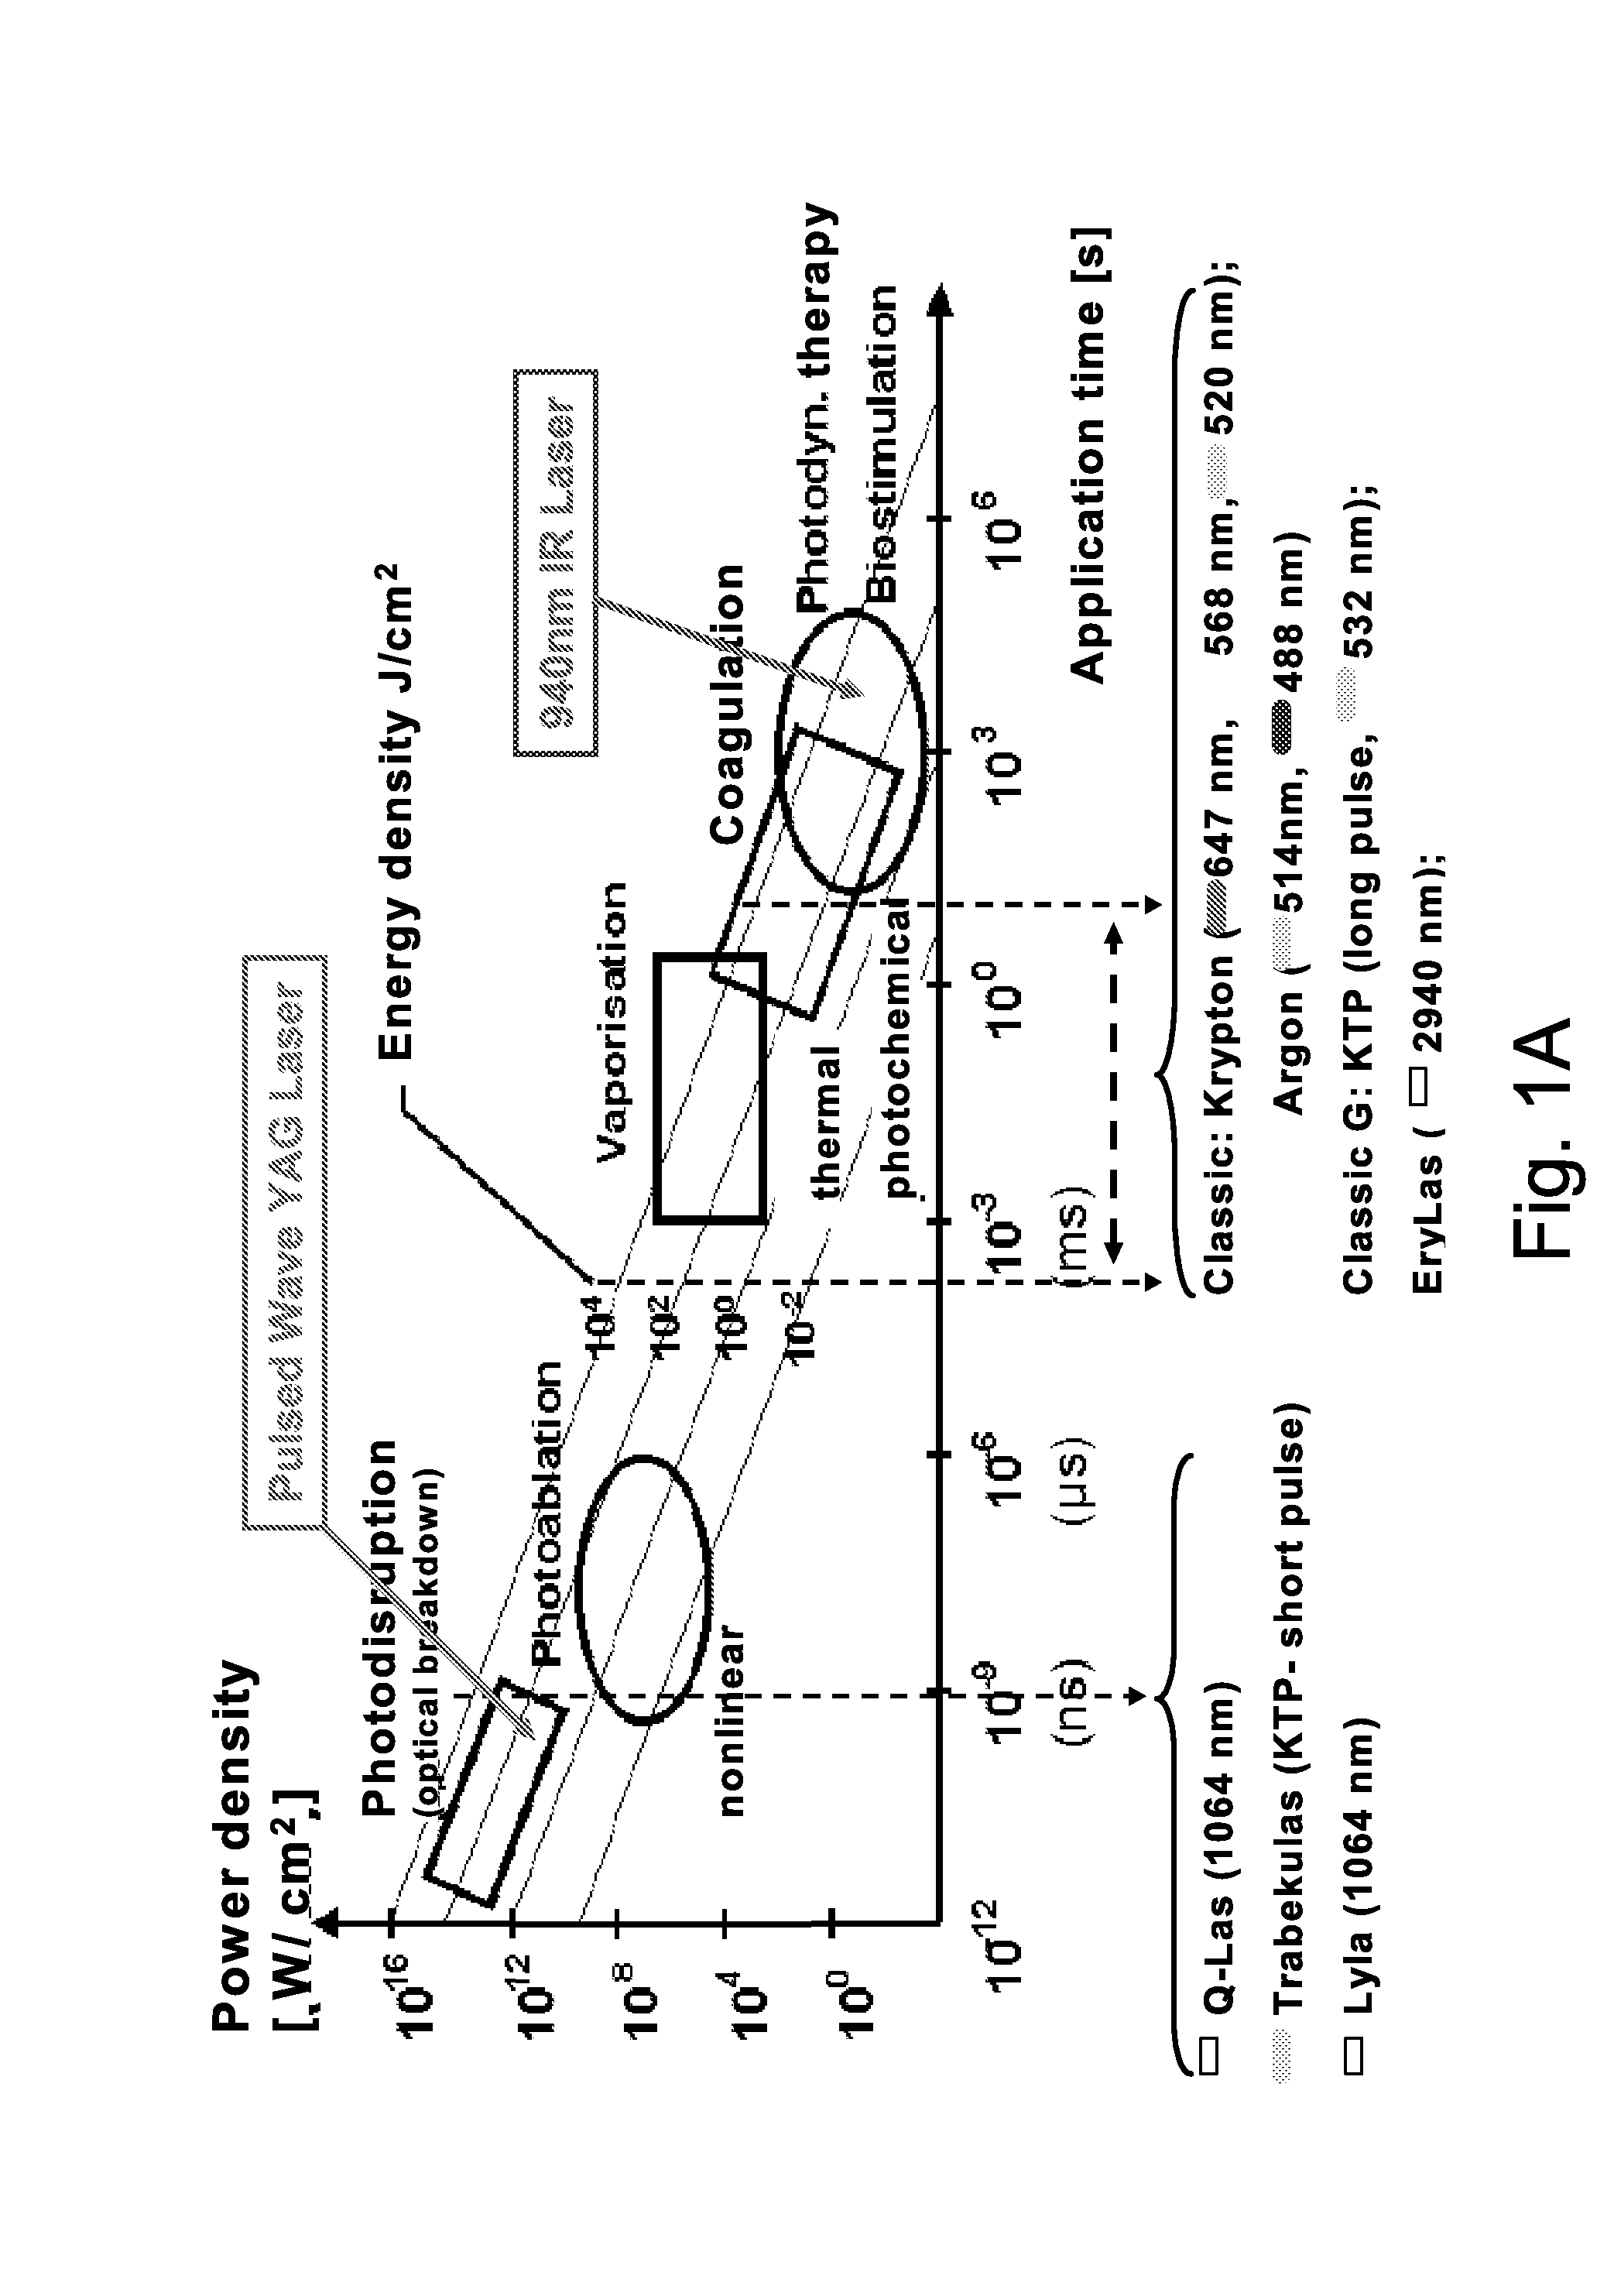 Two step mammalian biofilm treatment processes and systems